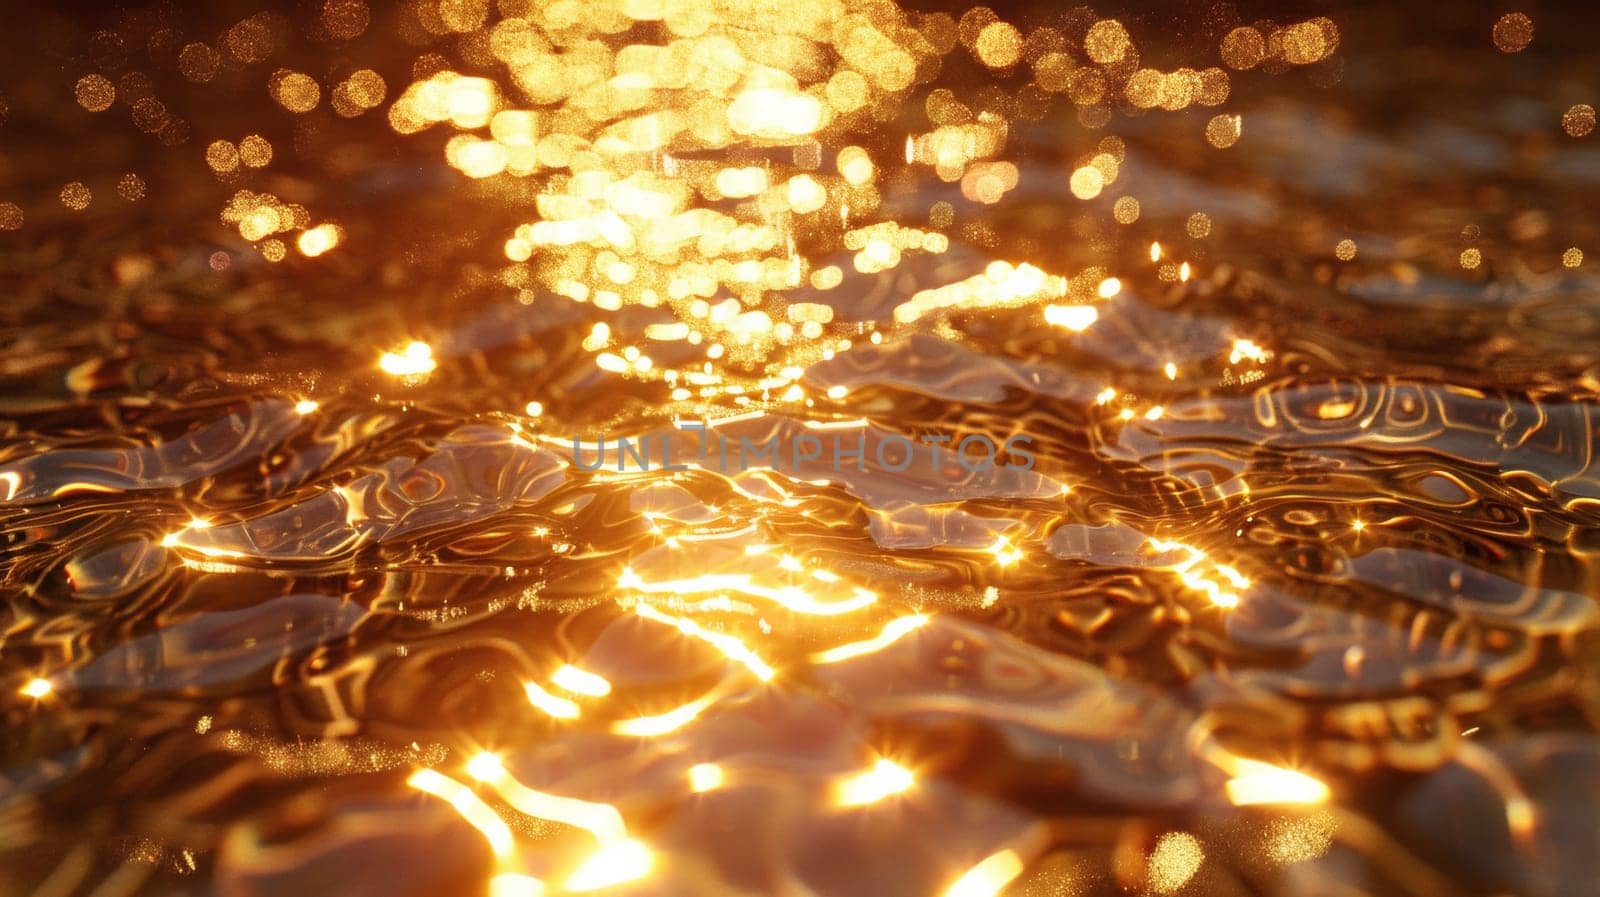 A close up of a shiny surface with some lights shining on it, AI by starush